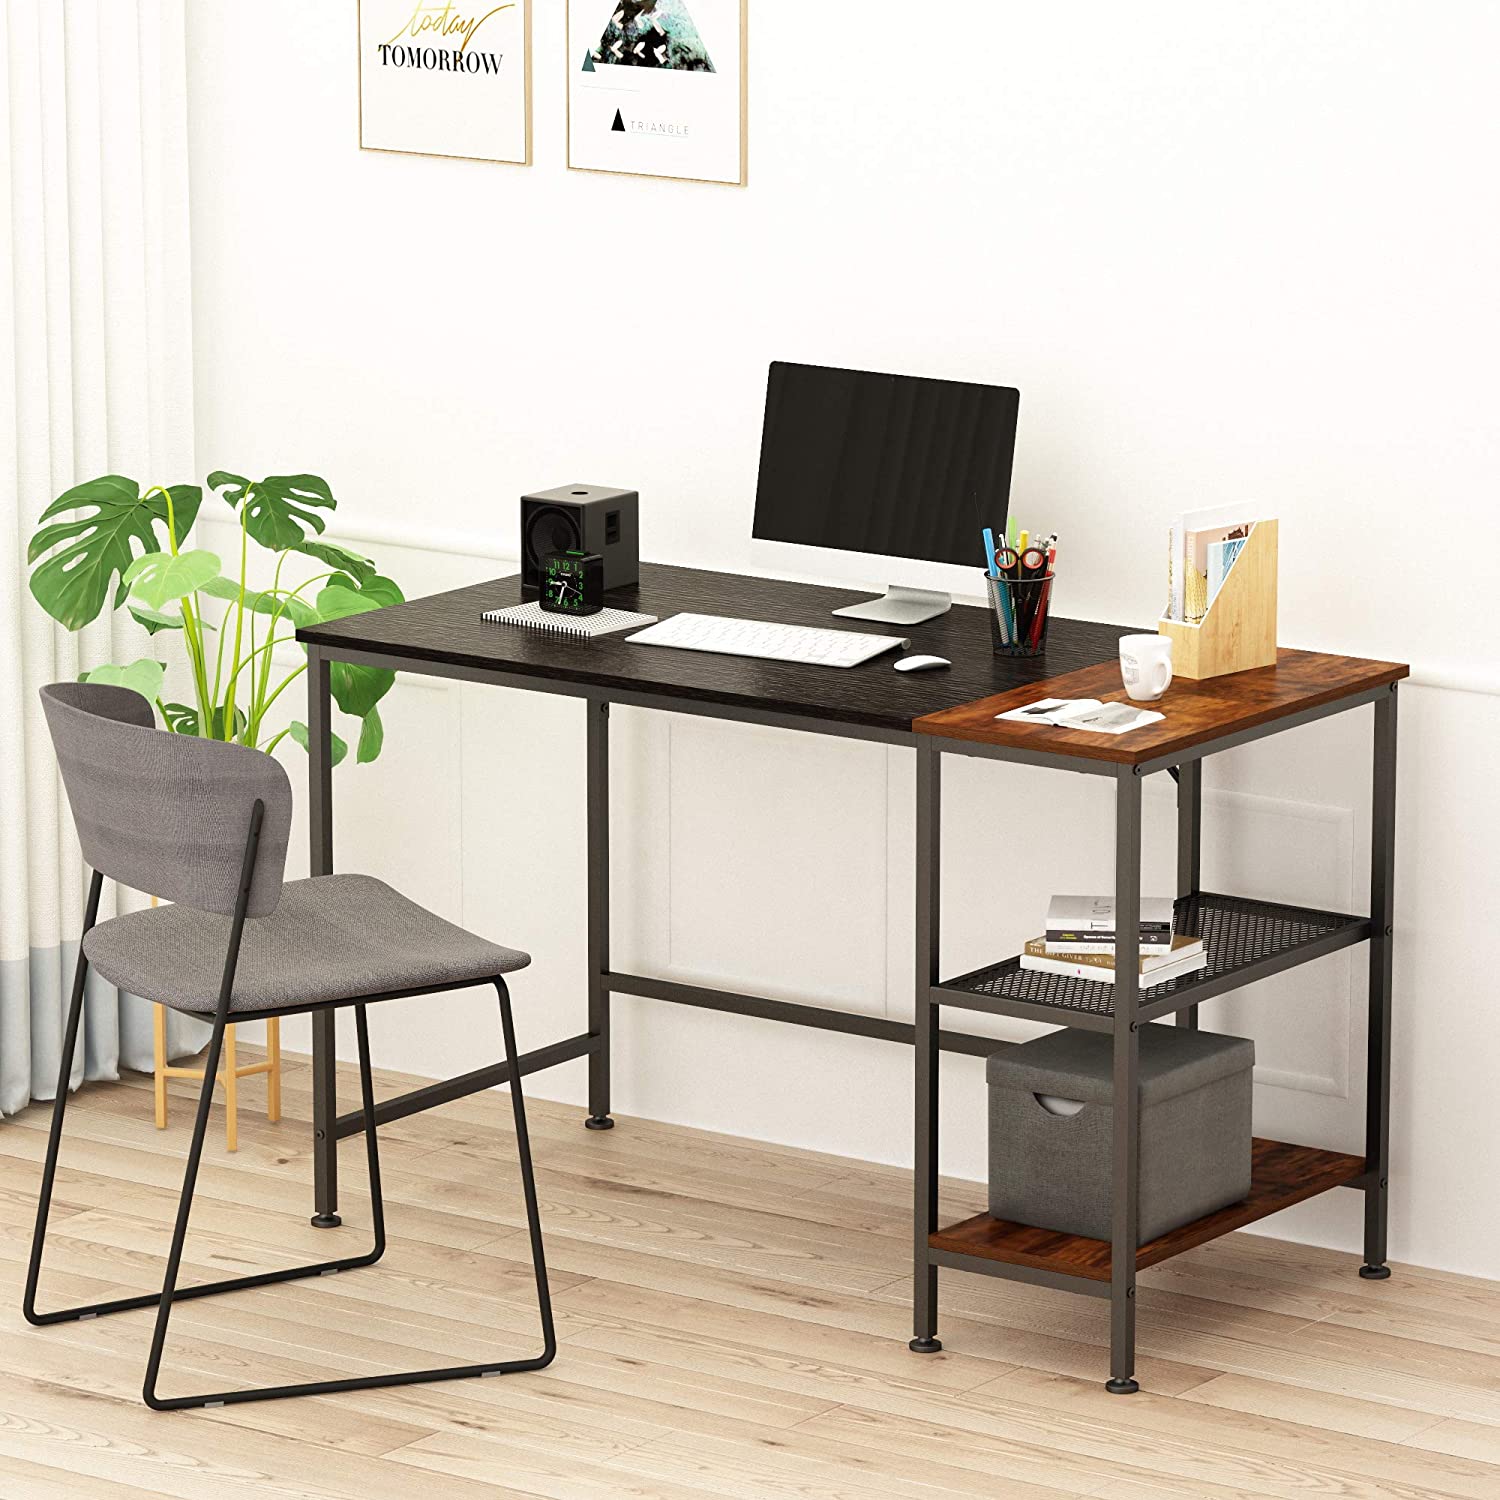 JOISCOPE Computer Desk with Shelves,Laptop Table with Grid Drawer,47 inches Black Oak Finish 